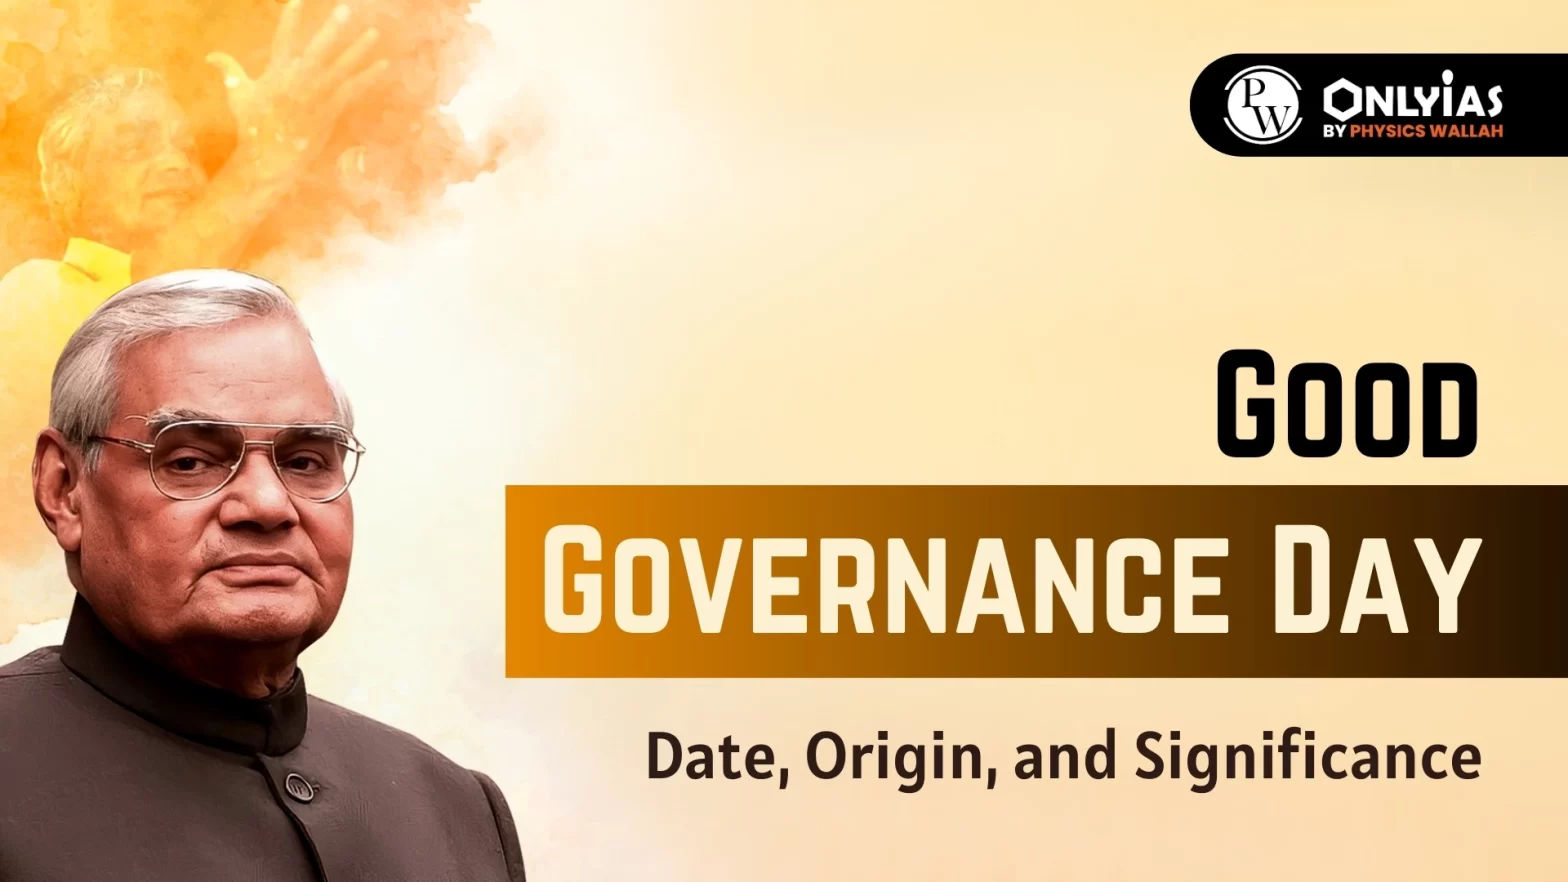 Good Governance Day 2023: Date, Origin, and Significance